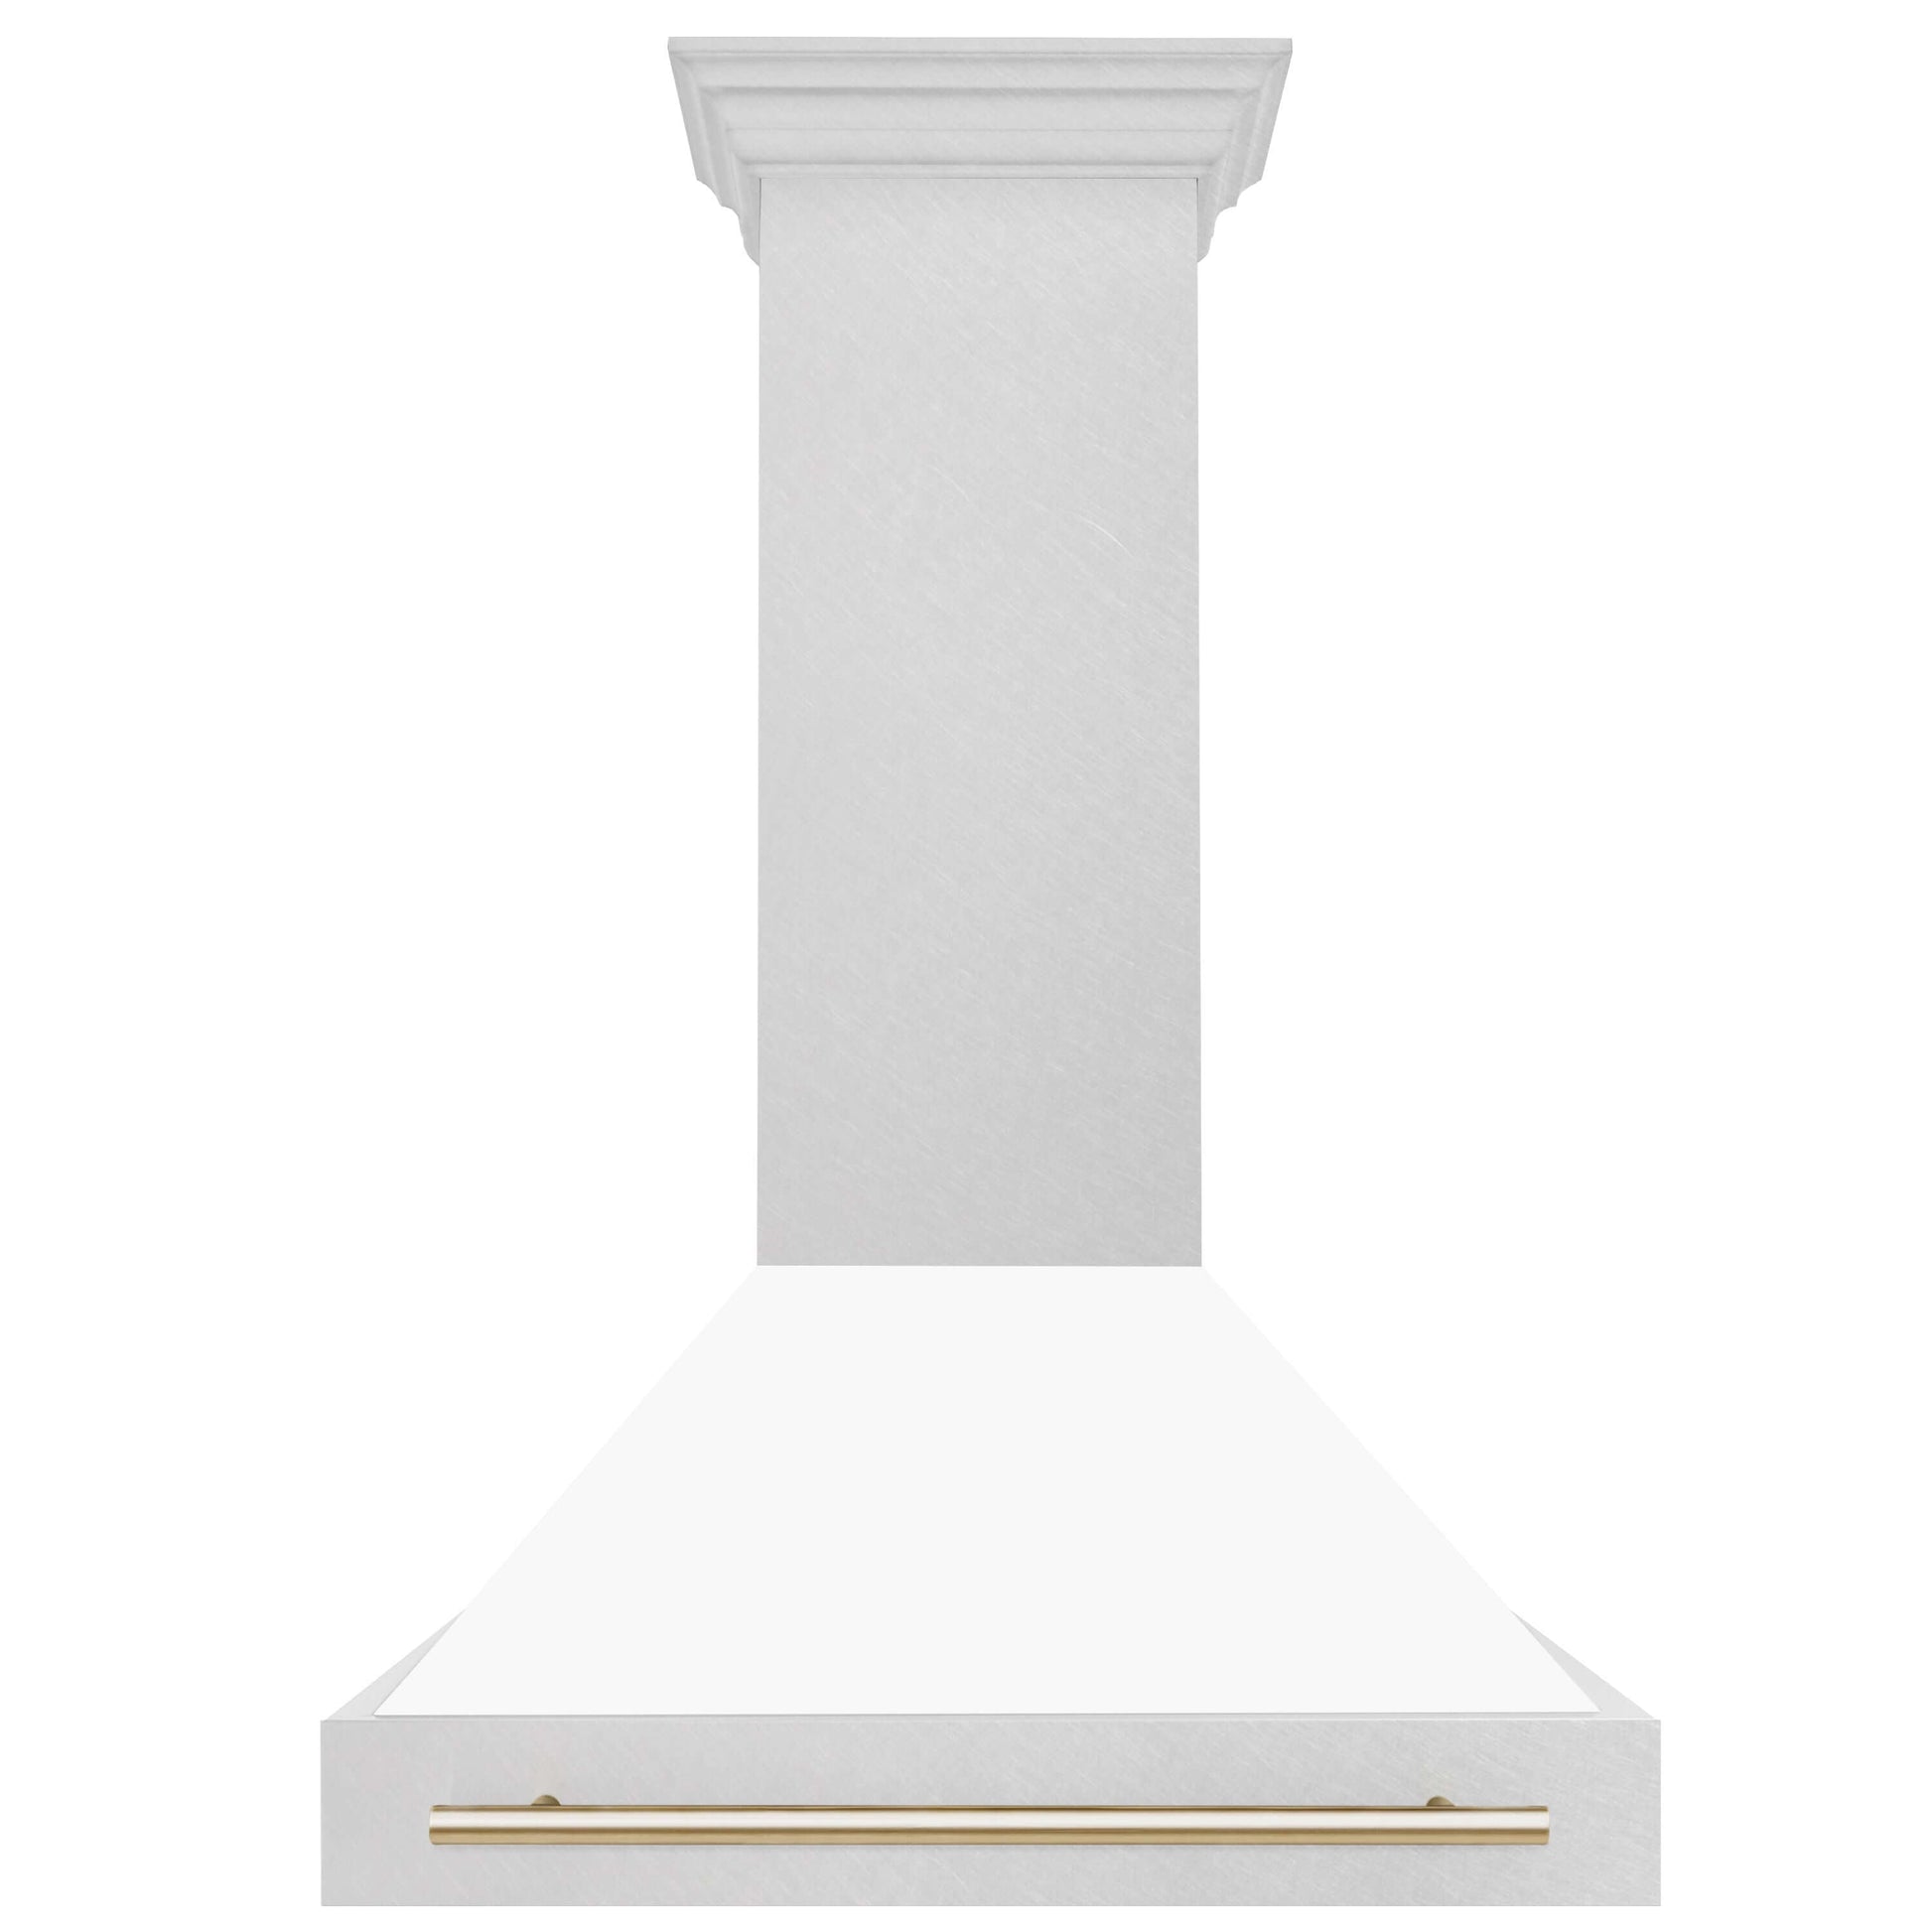 ZLINE Autograph Edition 36" Range Hood with DuraSnow Steel Shell - Matte White and Accented Handle